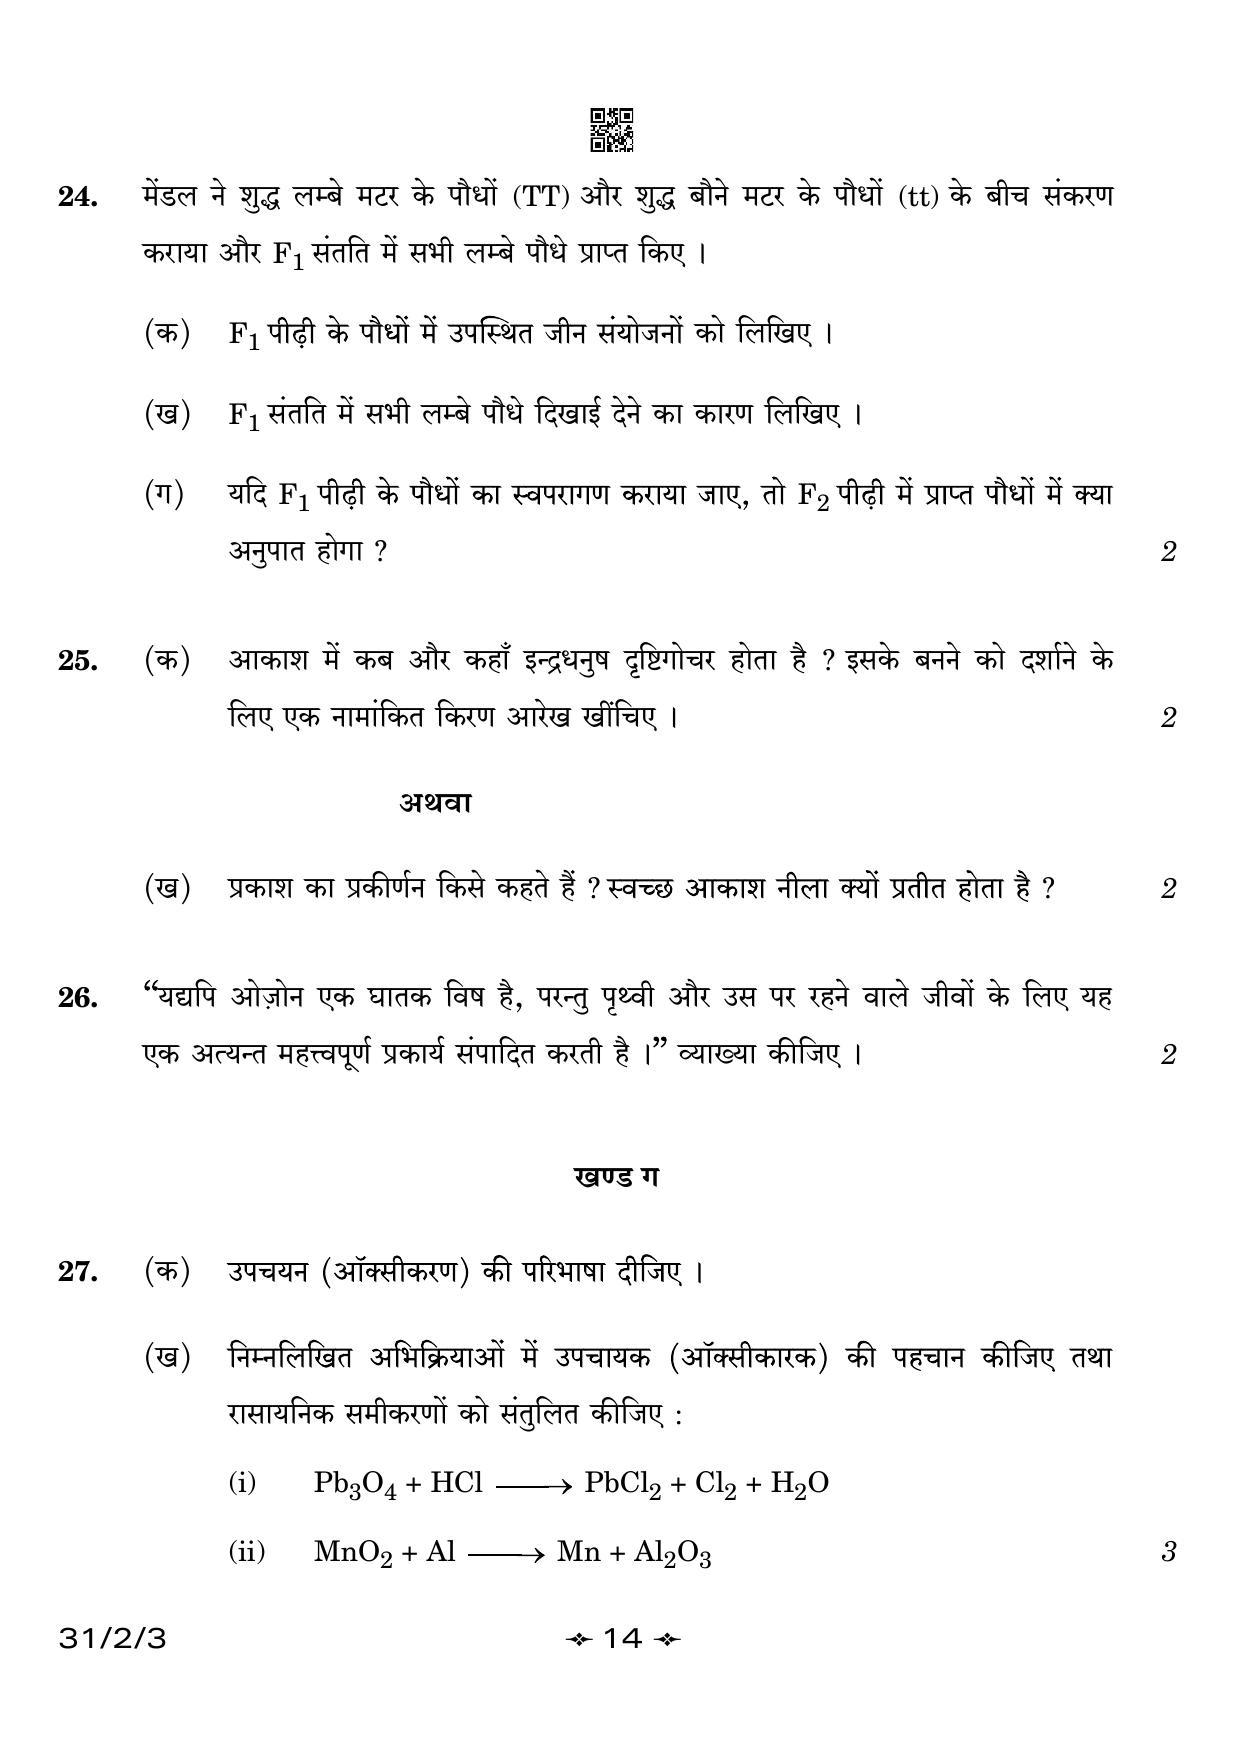 CBSE Class 10 31-2-3 Science 2023 Question Paper - Page 14